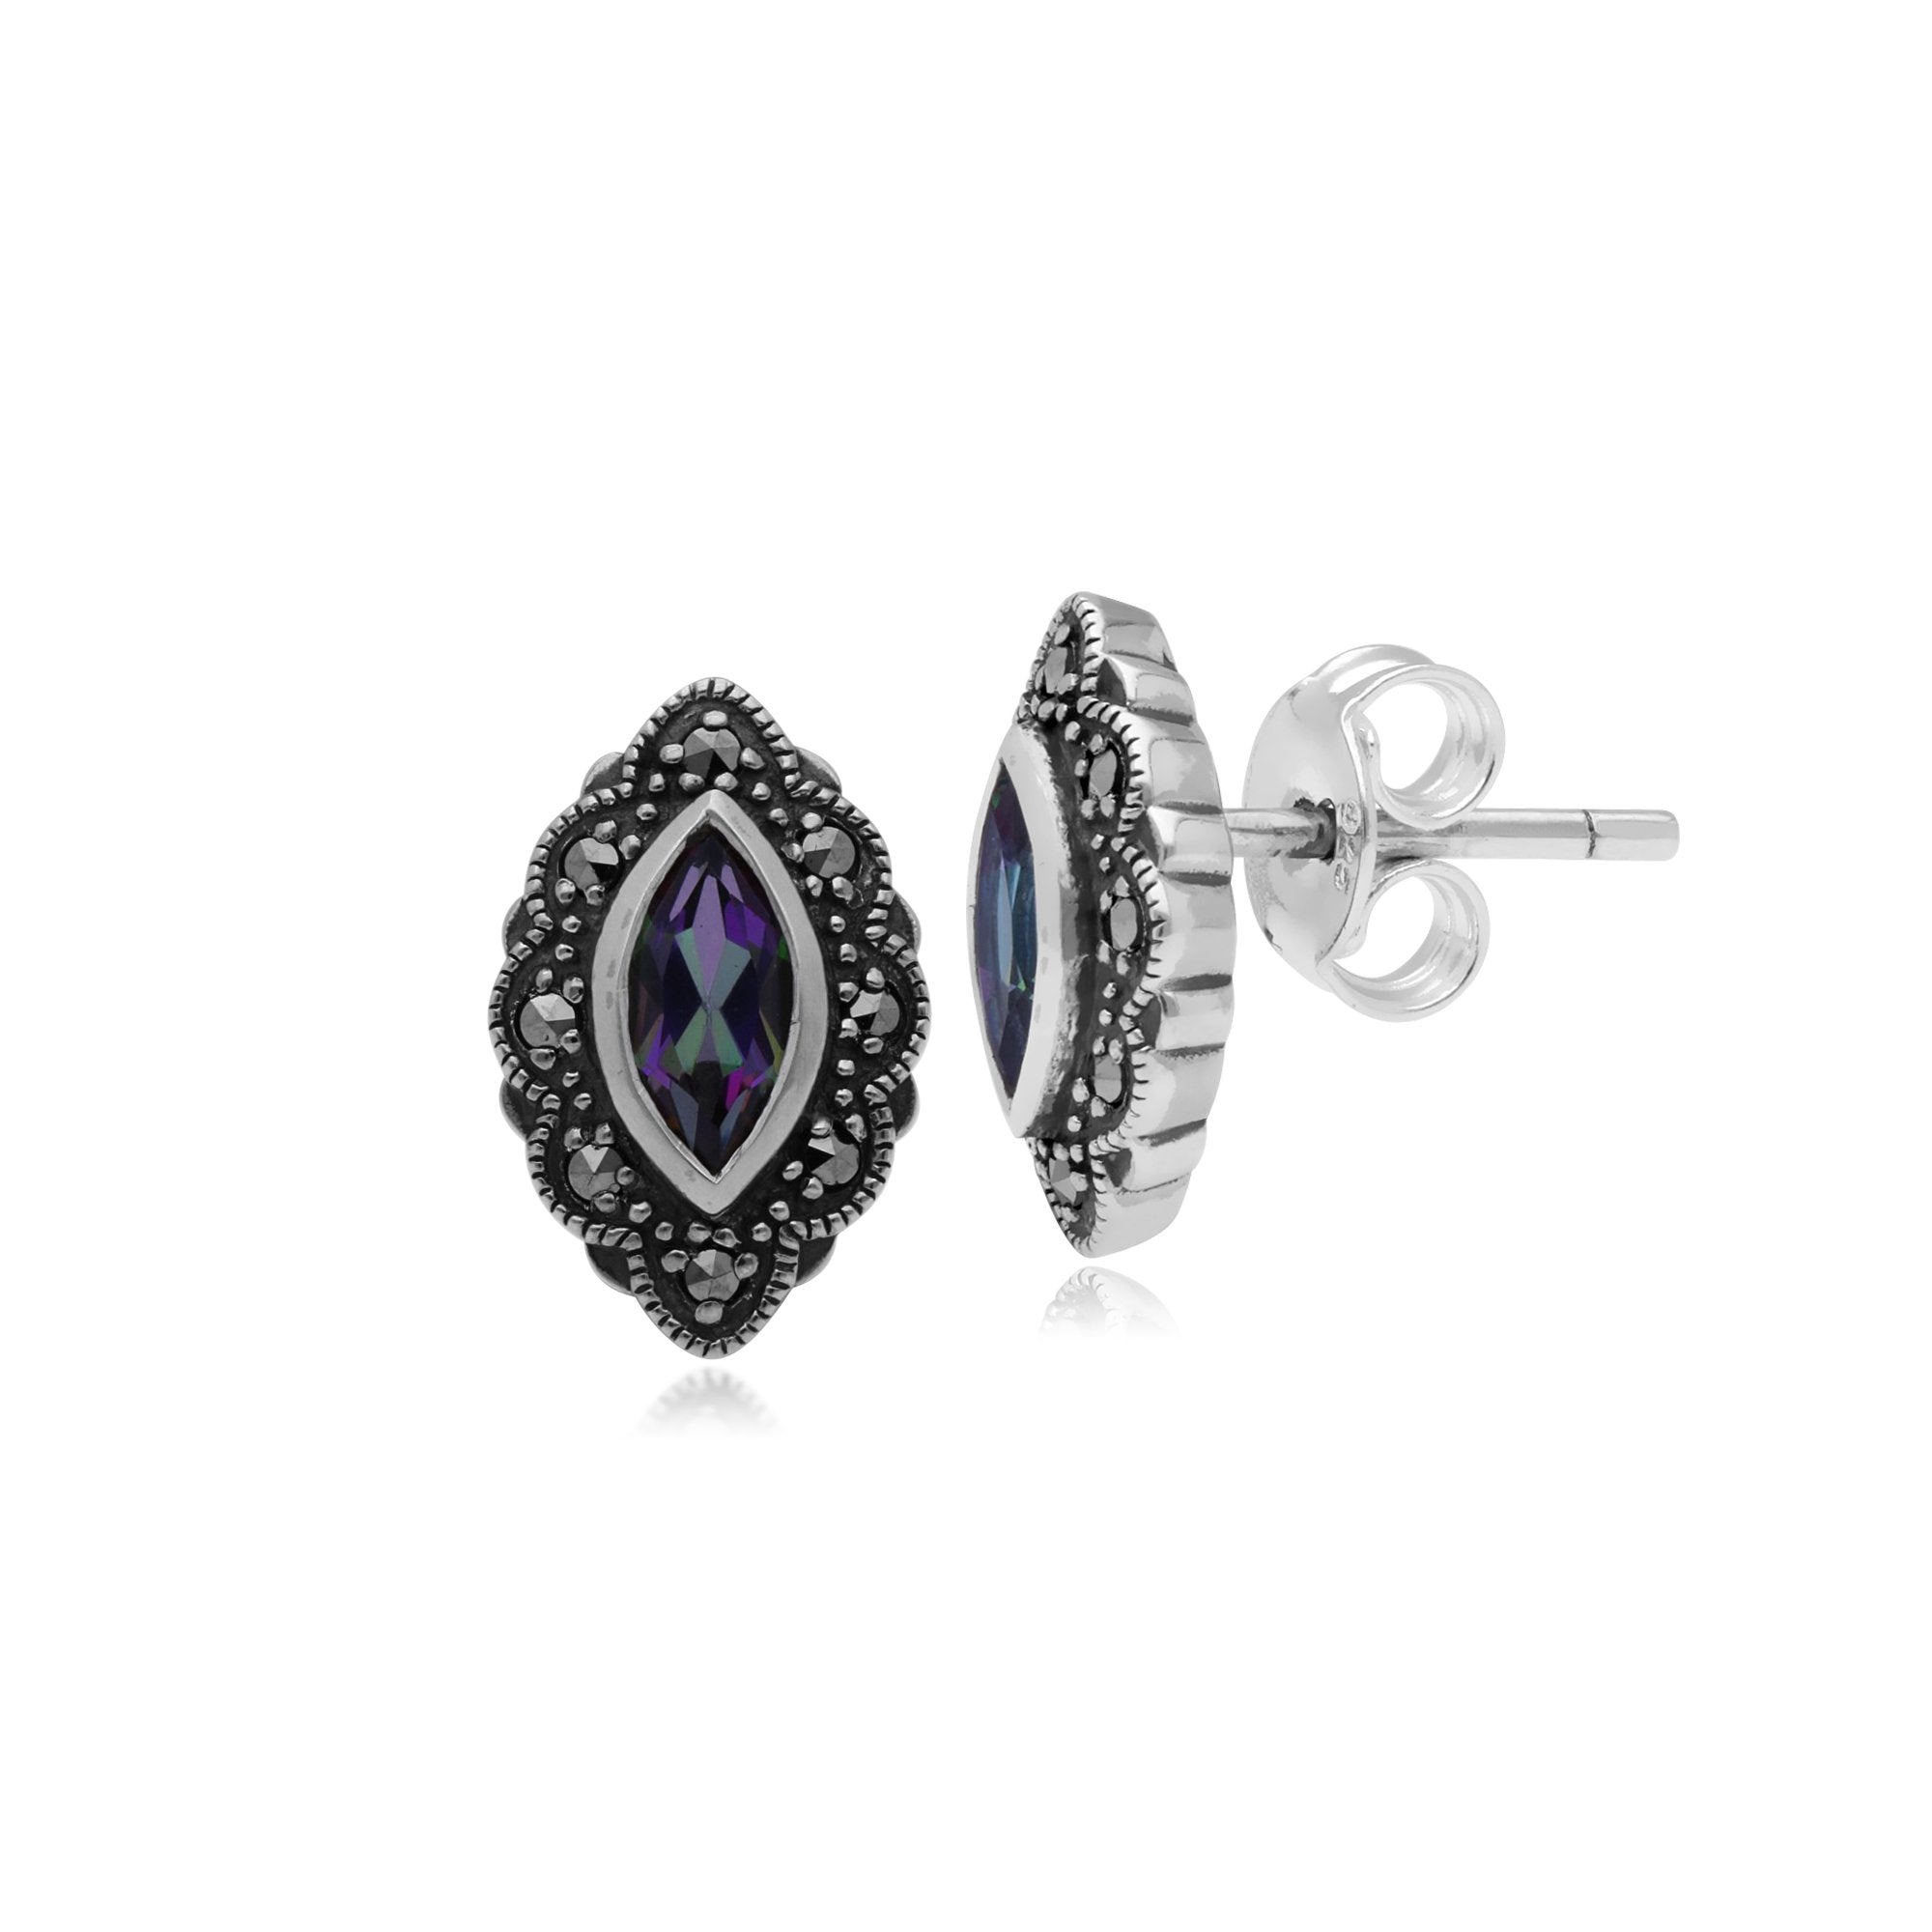 Art Nouveau Marquise Mystic Topaz & Marcasite Stud Earrings in 925 Sterling Silver